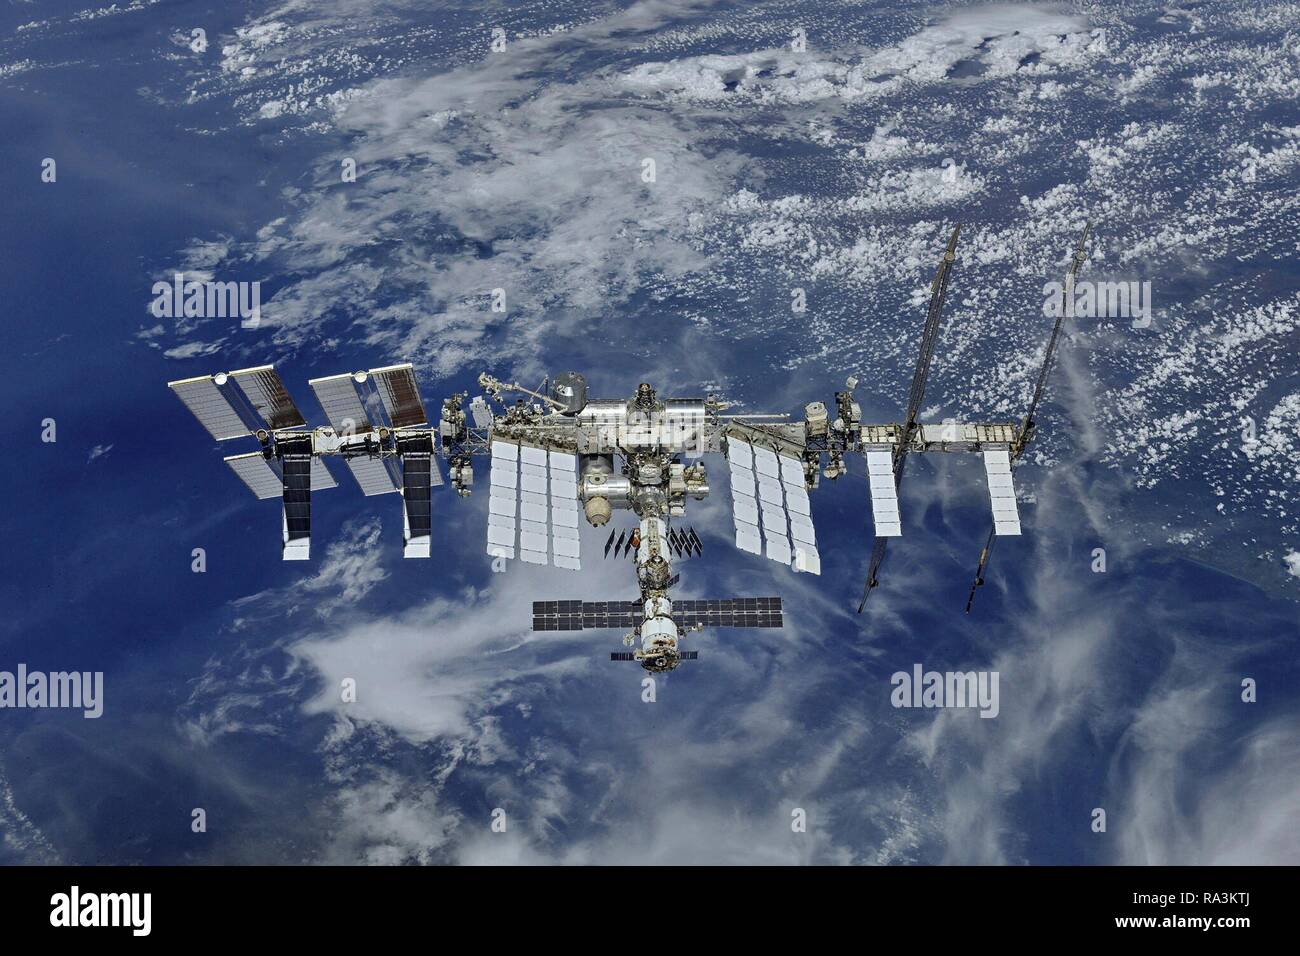 The International Space Station orbits over the earth December 20, 2018 in Earth Orbit. The orbiting laboratory has been inhabited by an international crew of Russians, Americans, Canadians, Japanese and European astronauts and researchers continuously since 1998. Stock Photo